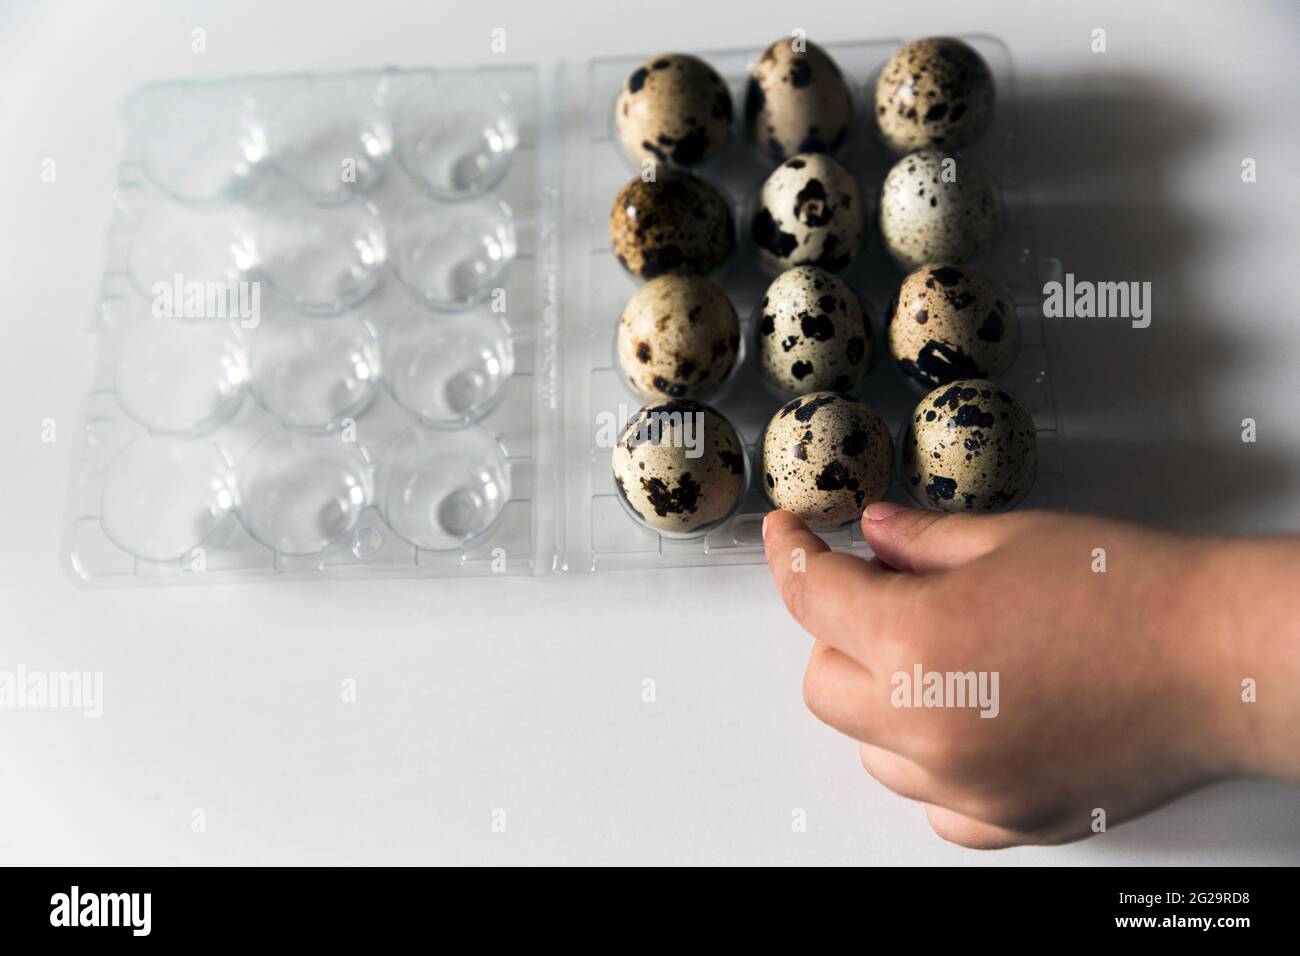 Close up of a toddler's hand picking up a quail egg from a plastic package full of them. Stock Photo